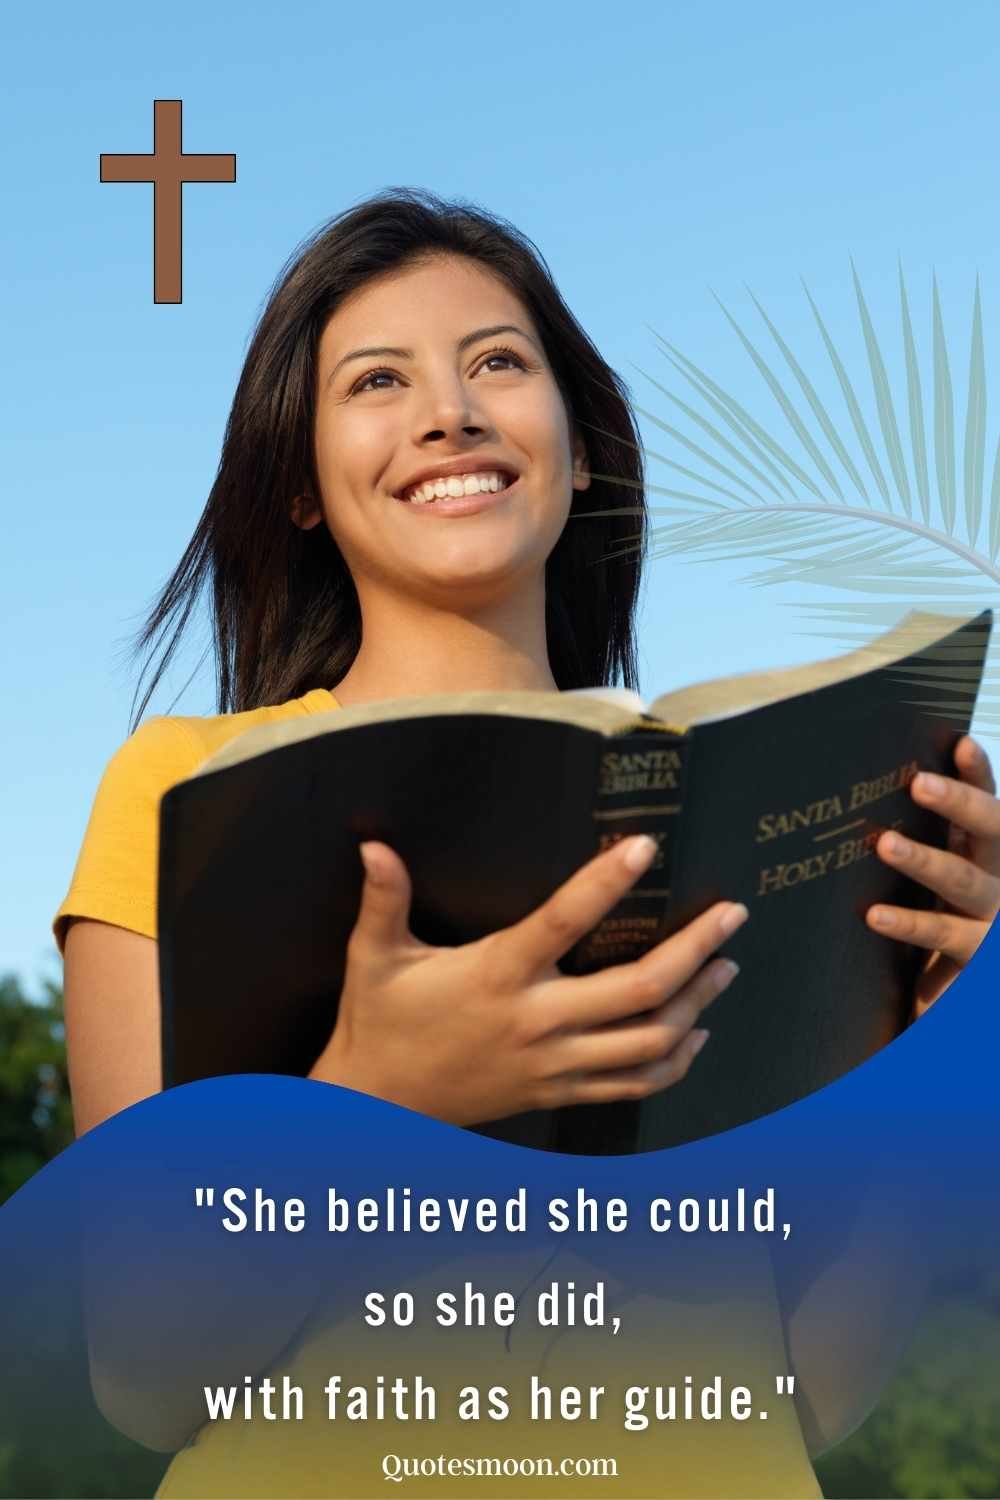 Empowering Christian Quotes for Women images